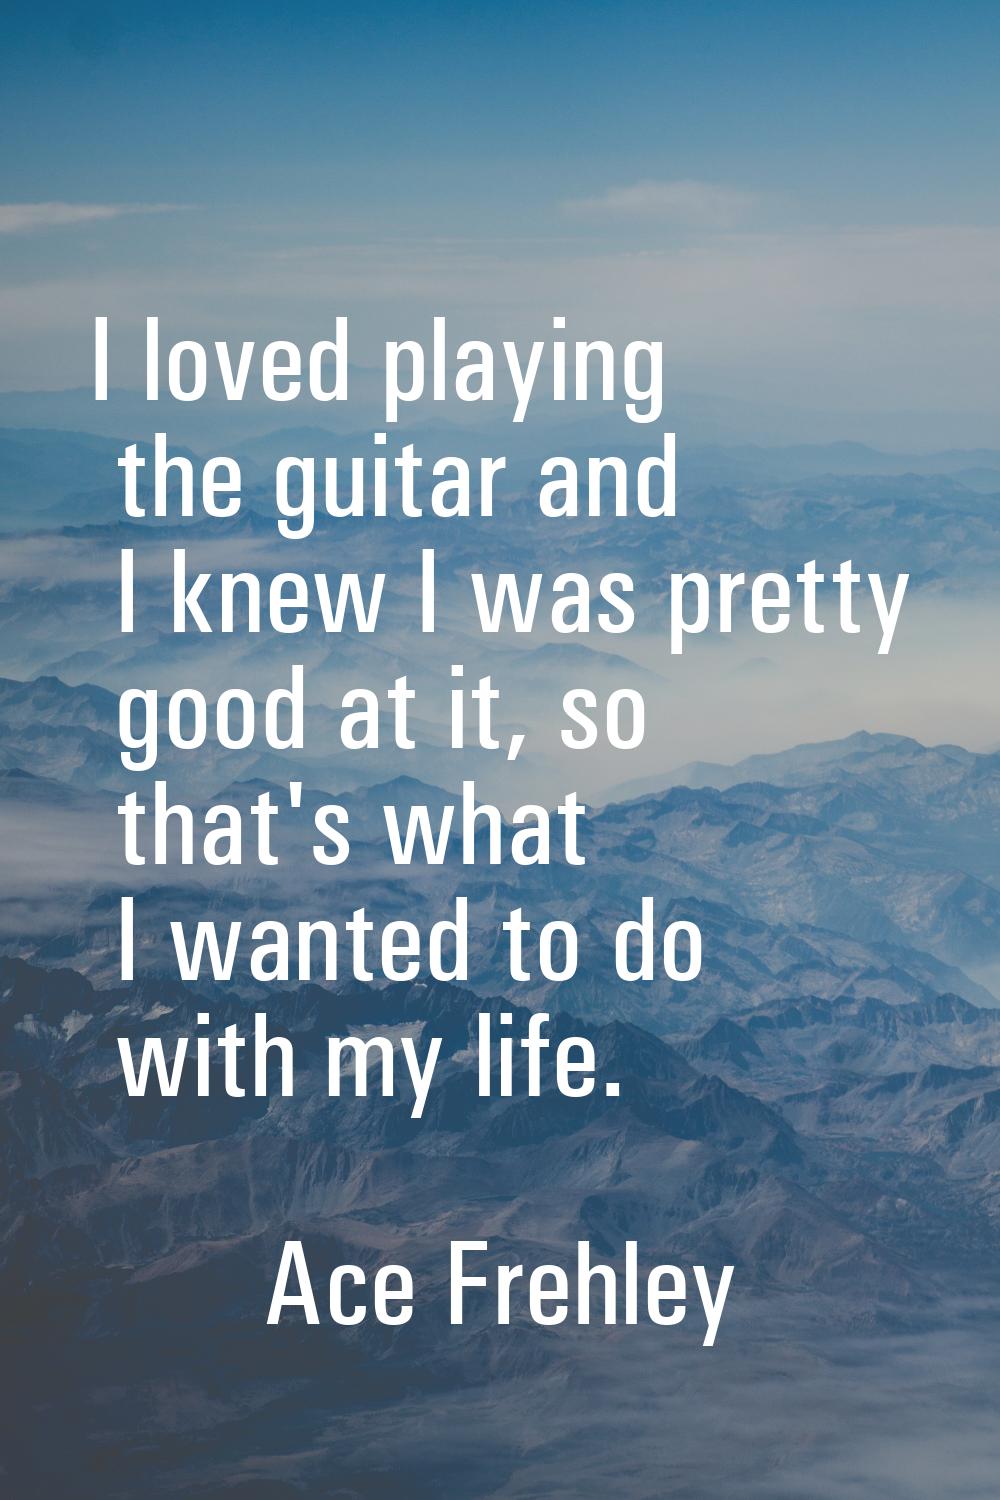 I loved playing the guitar and I knew I was pretty good at it, so that's what I wanted to do with m